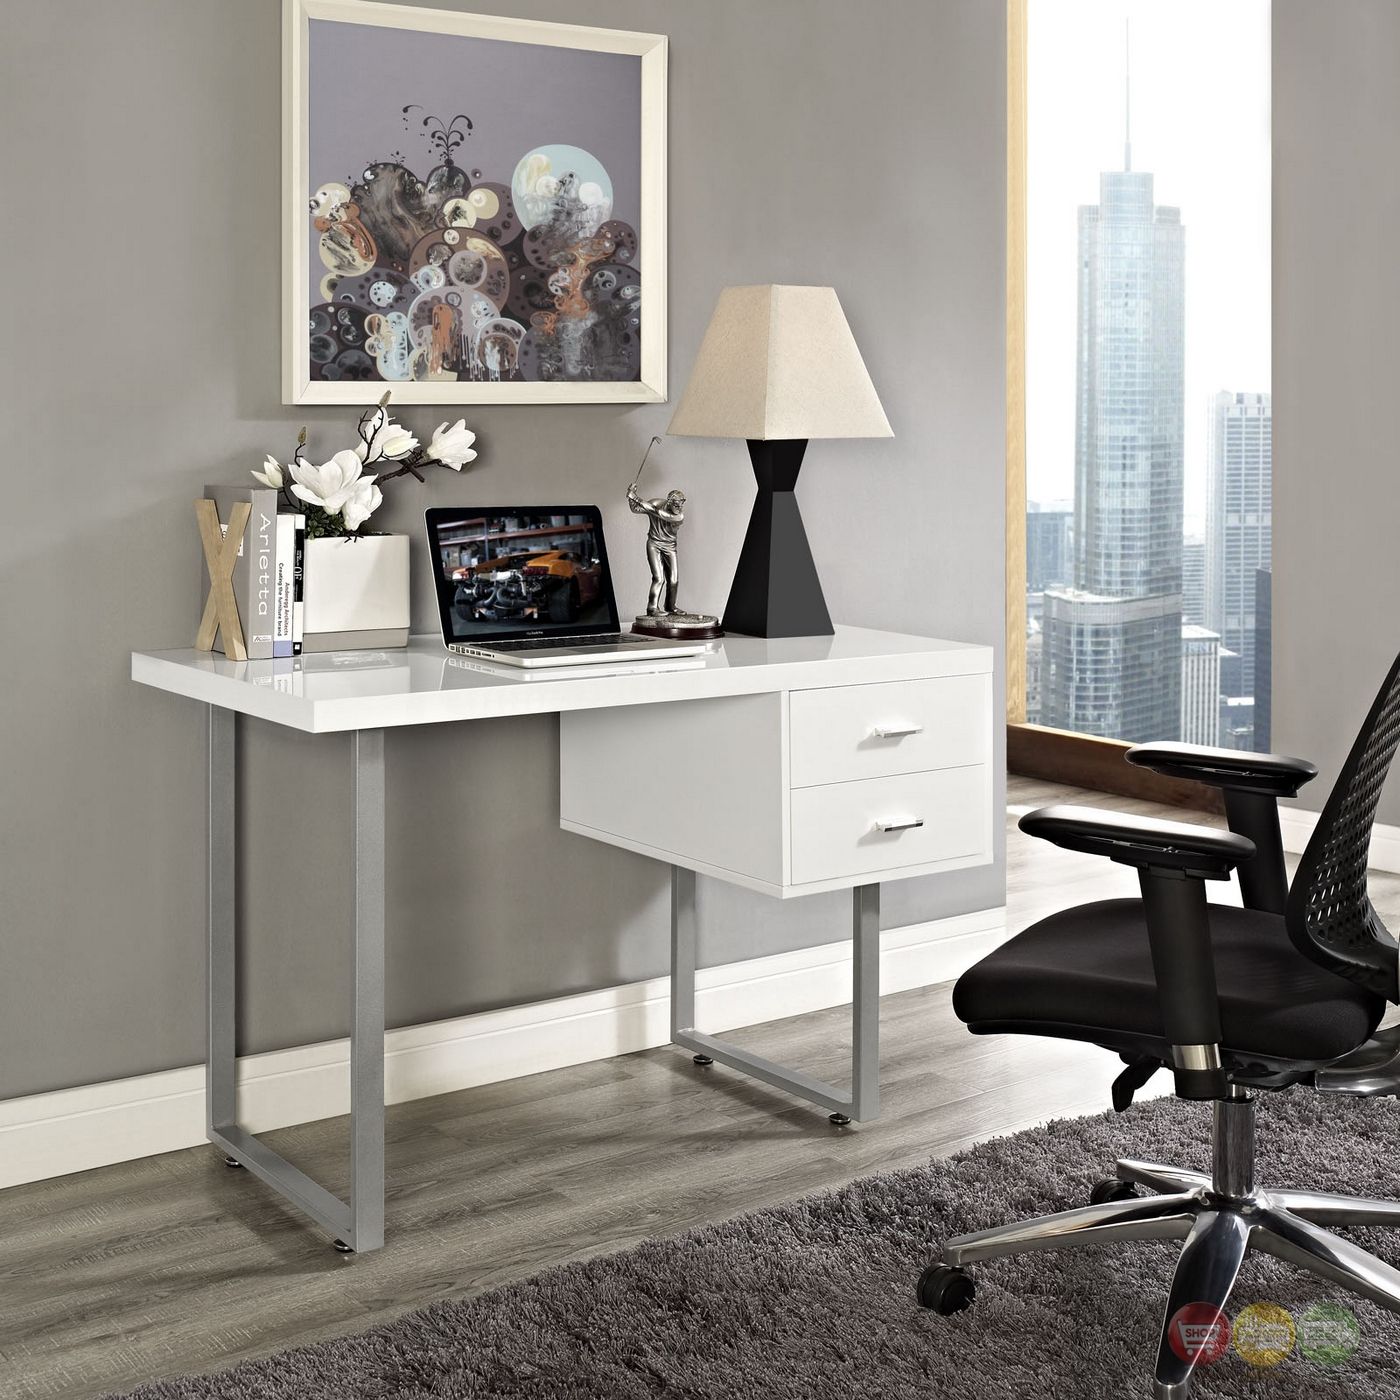 Turn Contemporary 2 Drawer Office Desk With High Gloss Finish, White For White Finish Office Study Work Desks (View 9 of 15)